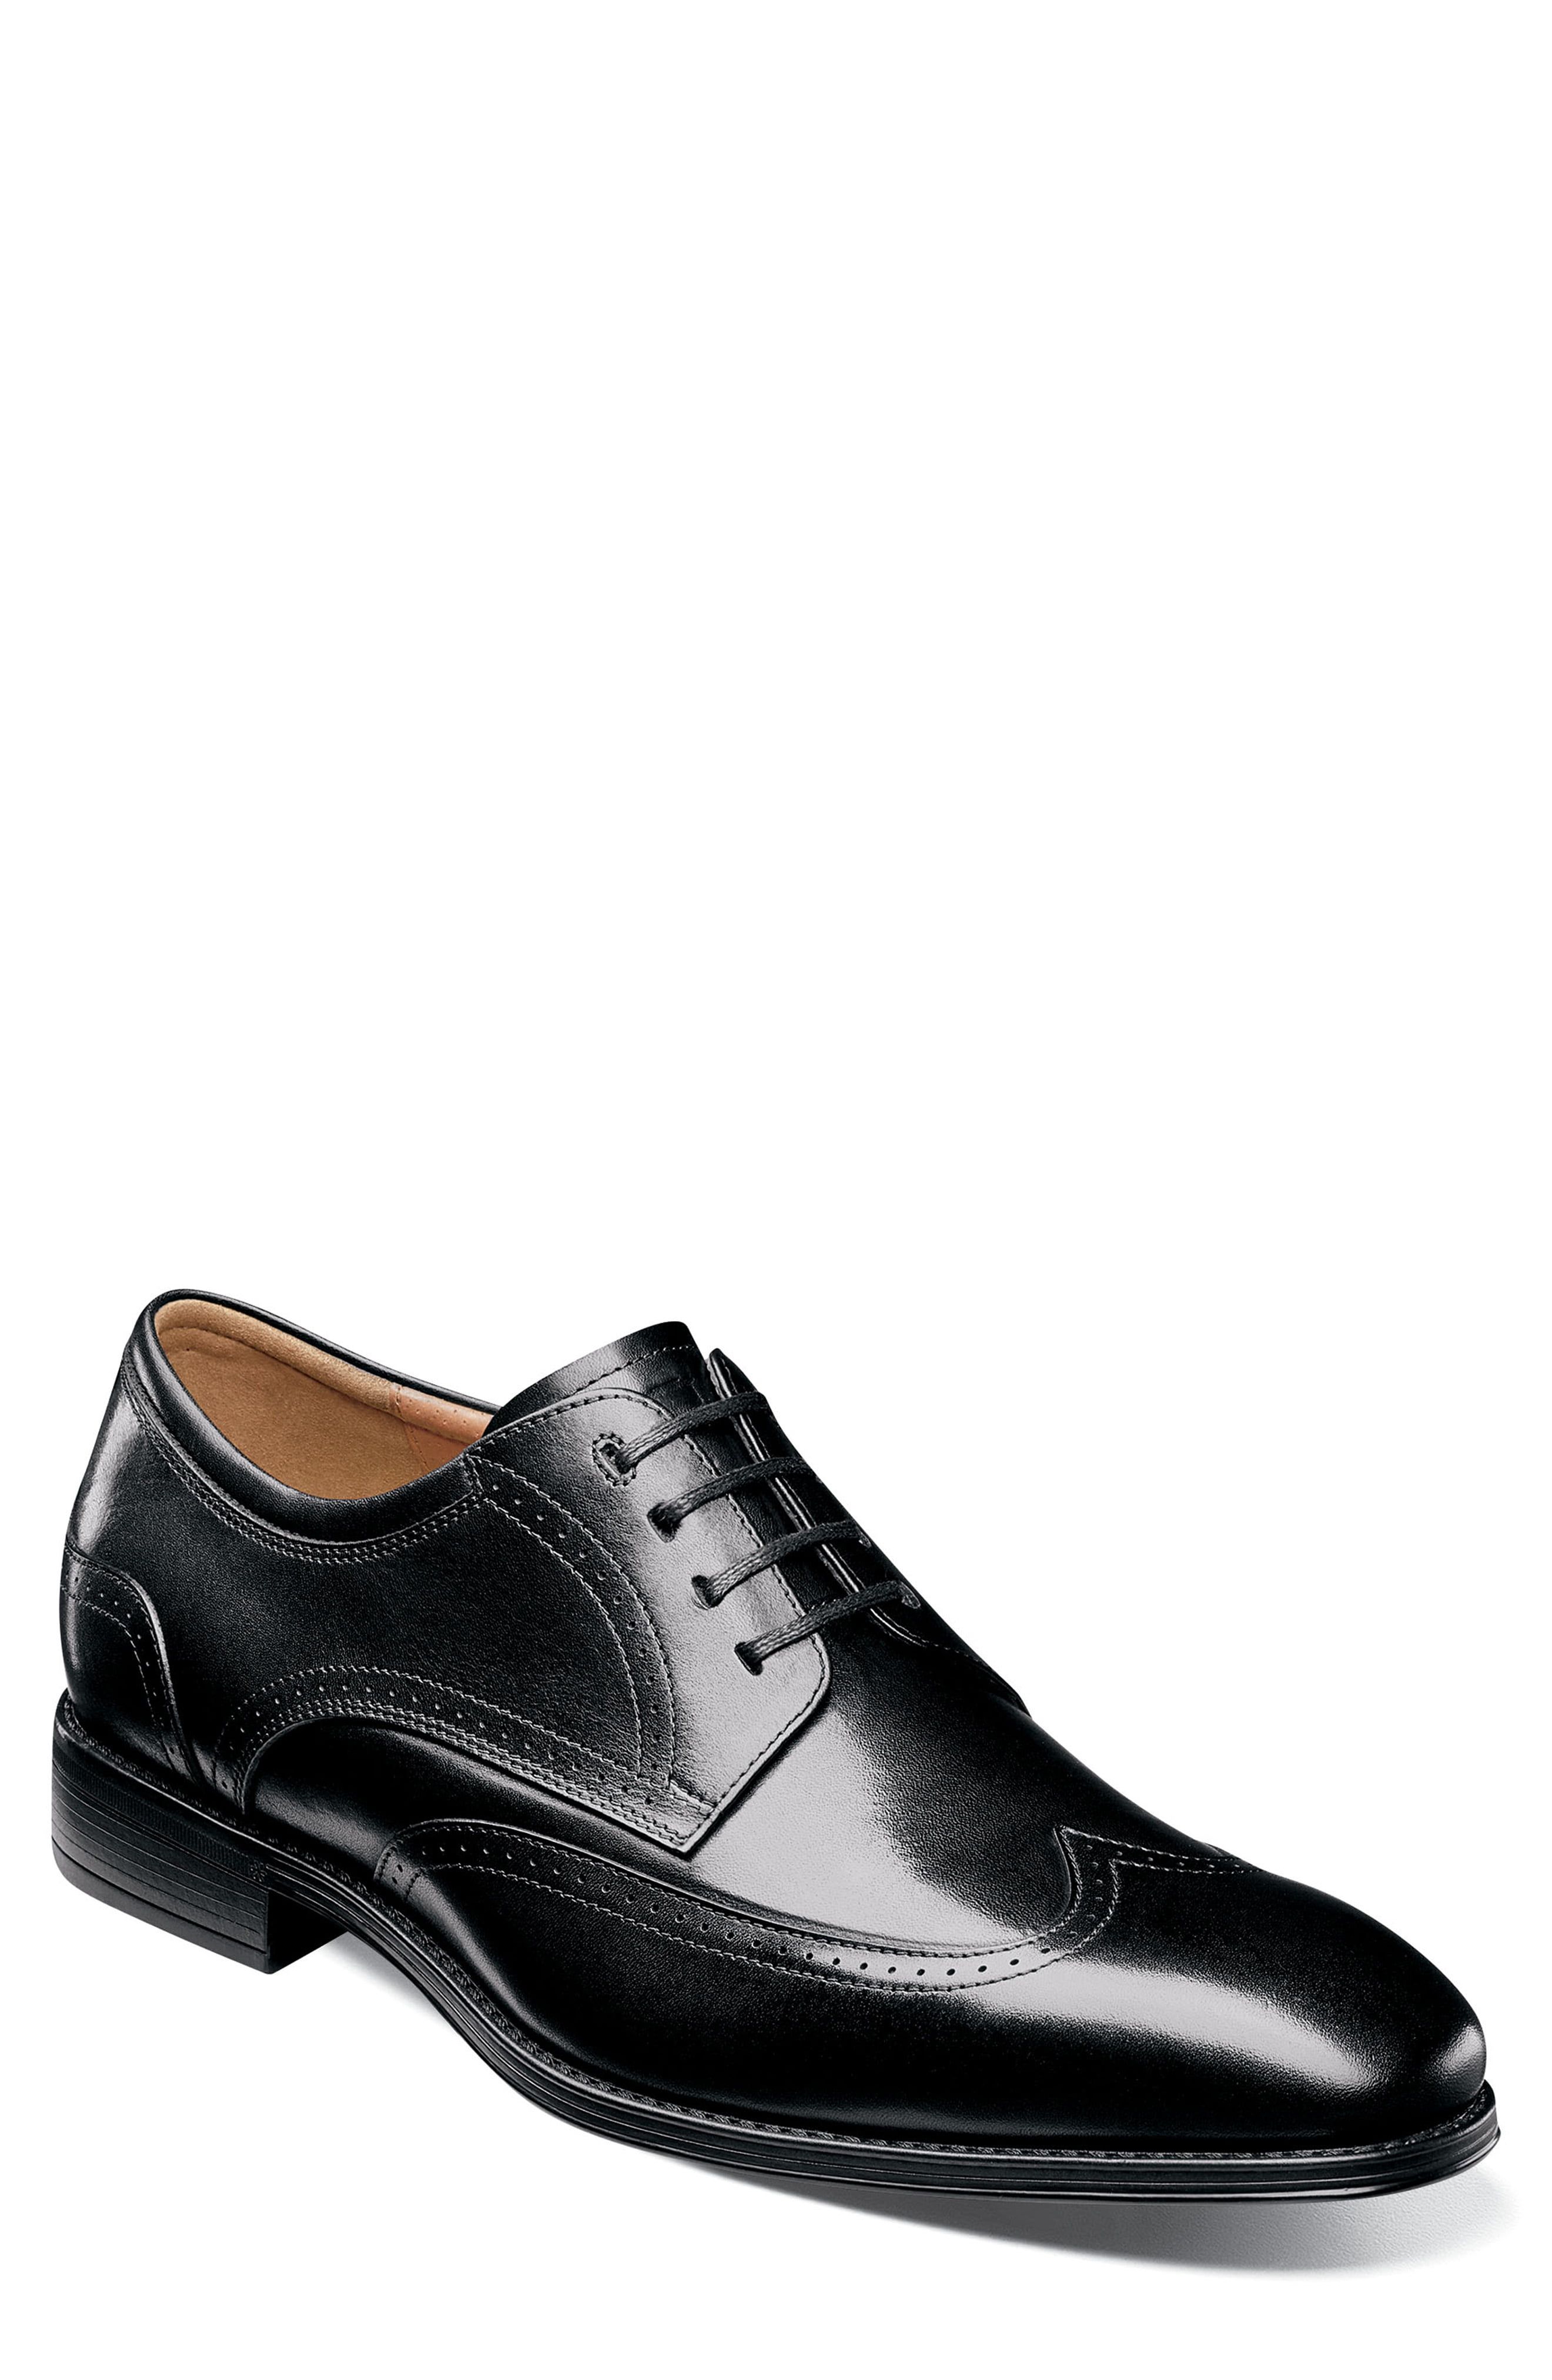 Wingtip Dress Shoes and Boots